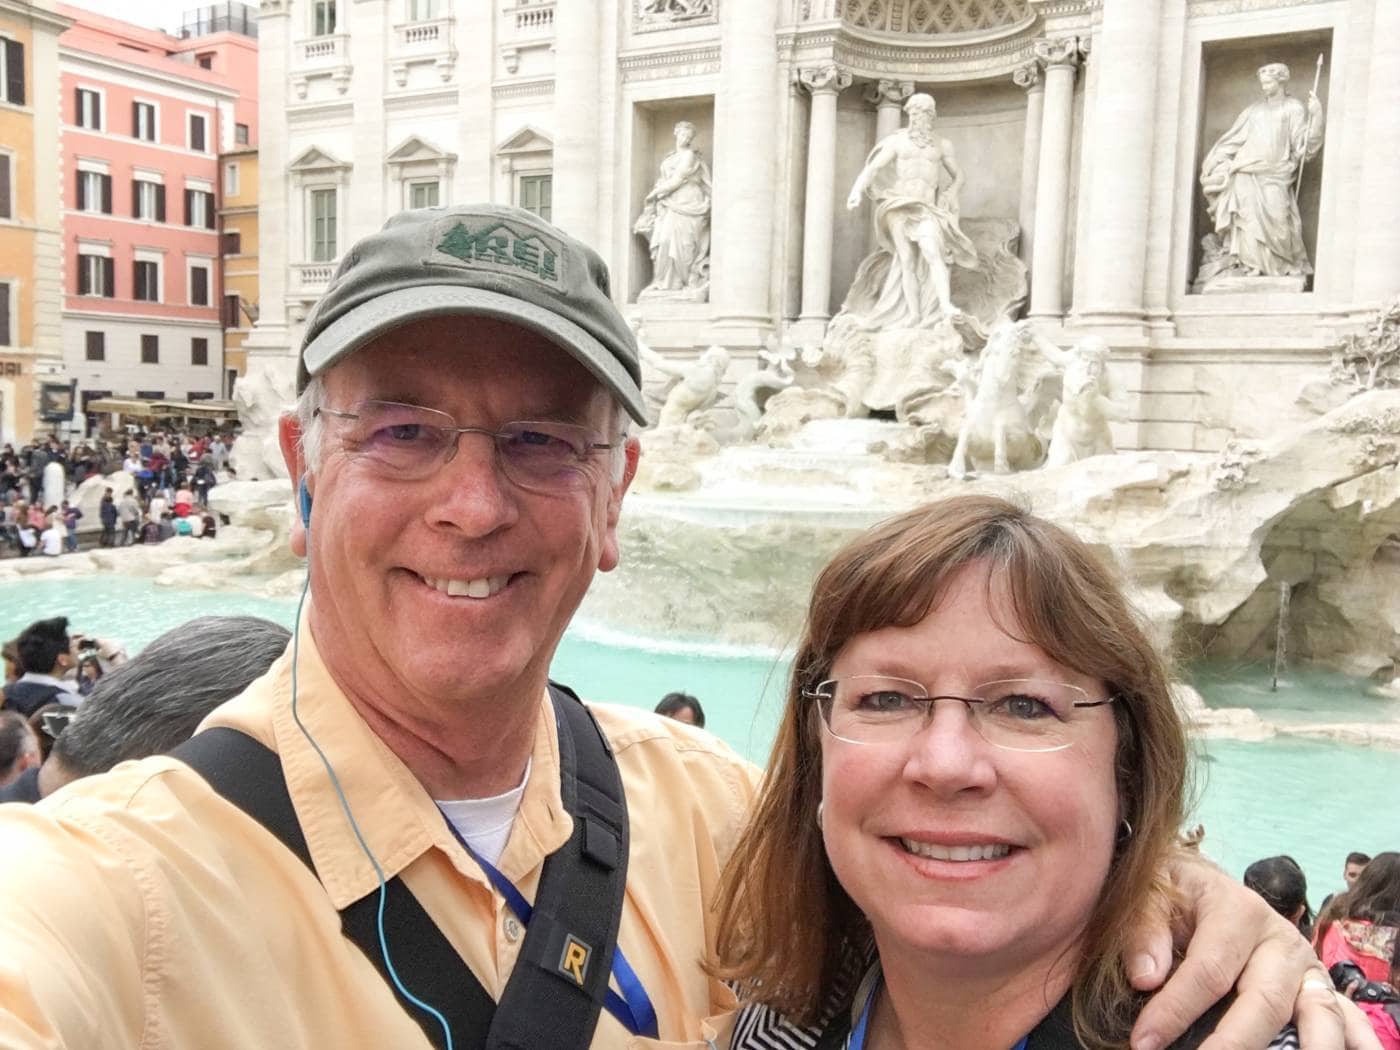 The Wylie Family in Italy - in front of the Trevi Fountain